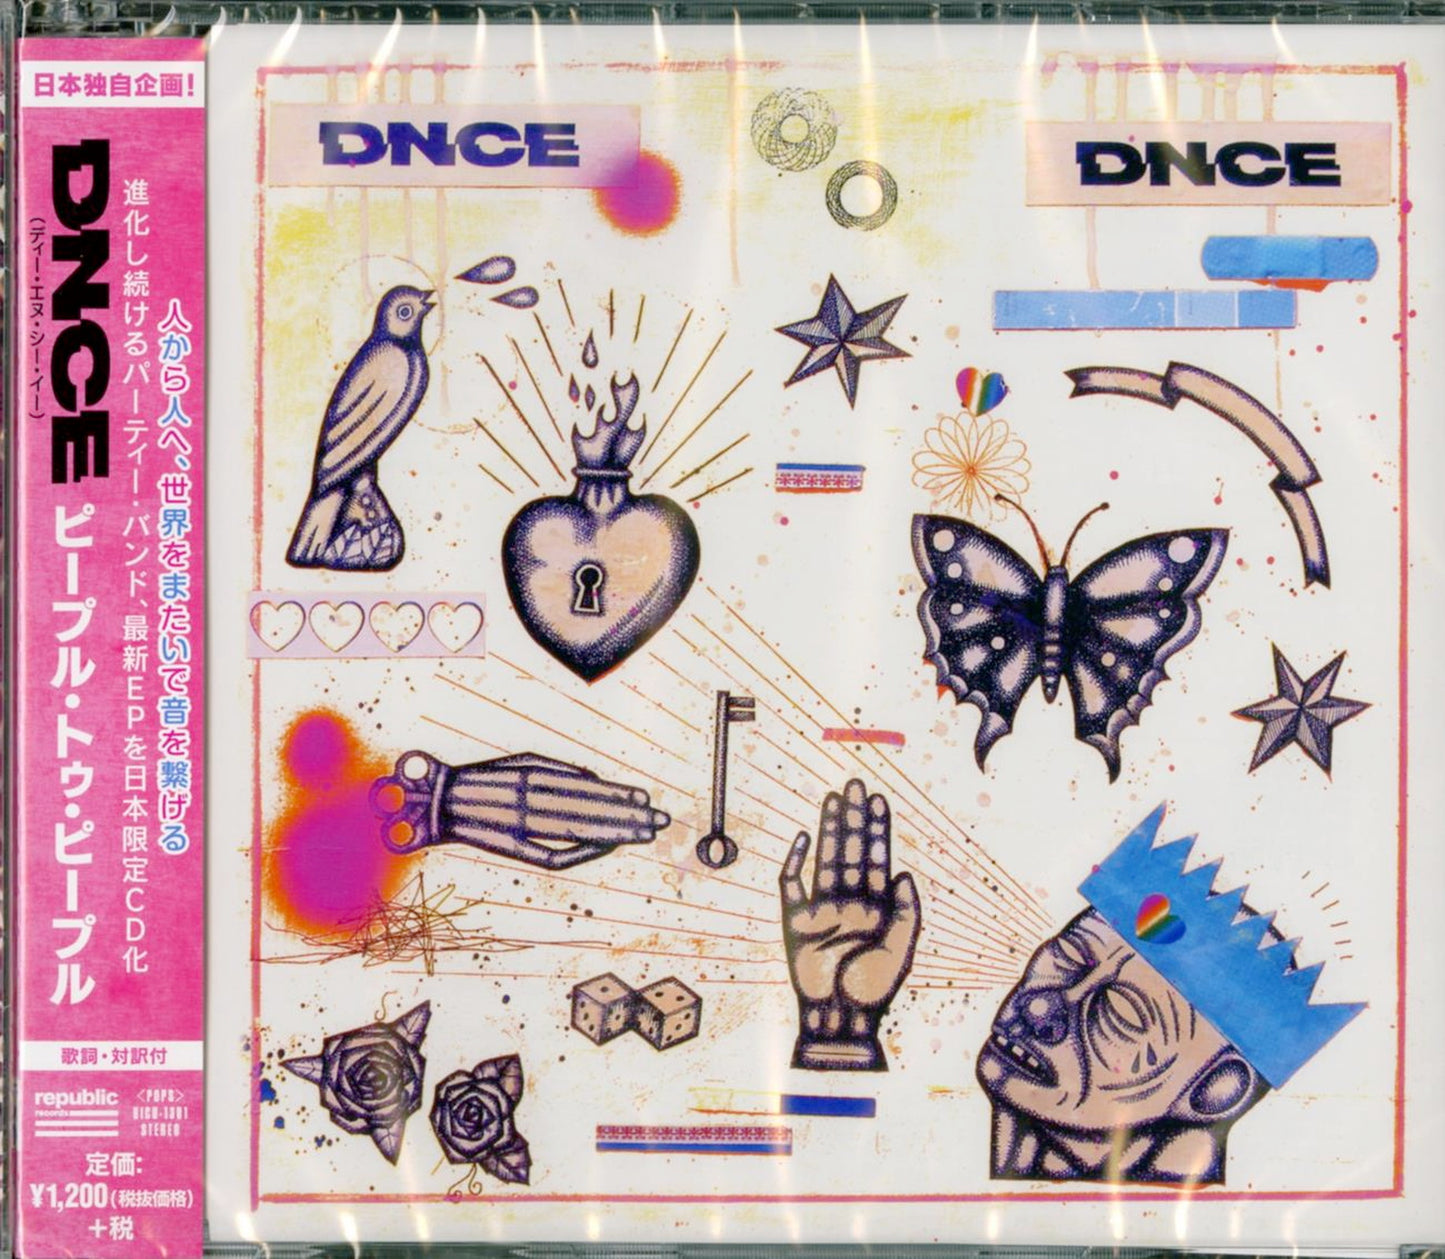 Dnce - People To People - Japan CD